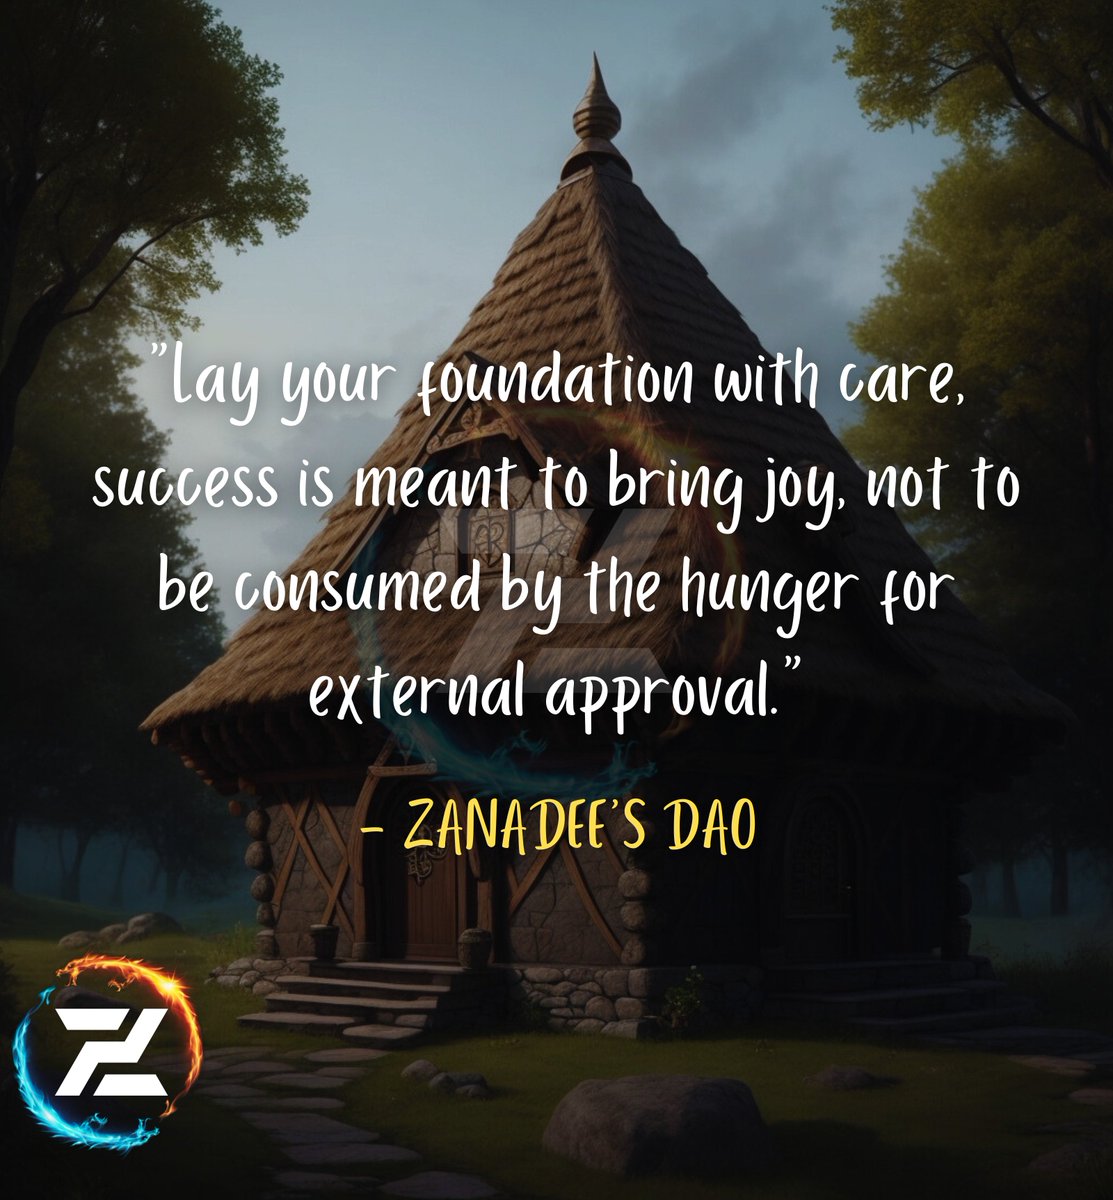 Joyful Edifice

“Lay your foundation with care, success is meant to bring joy, not to be consumed by the hunger for external approval.”

#StrongFoundation #JoyInSuccess #Happiness #Spirituality #InnerSatisfaction

Zanadee’s Dao